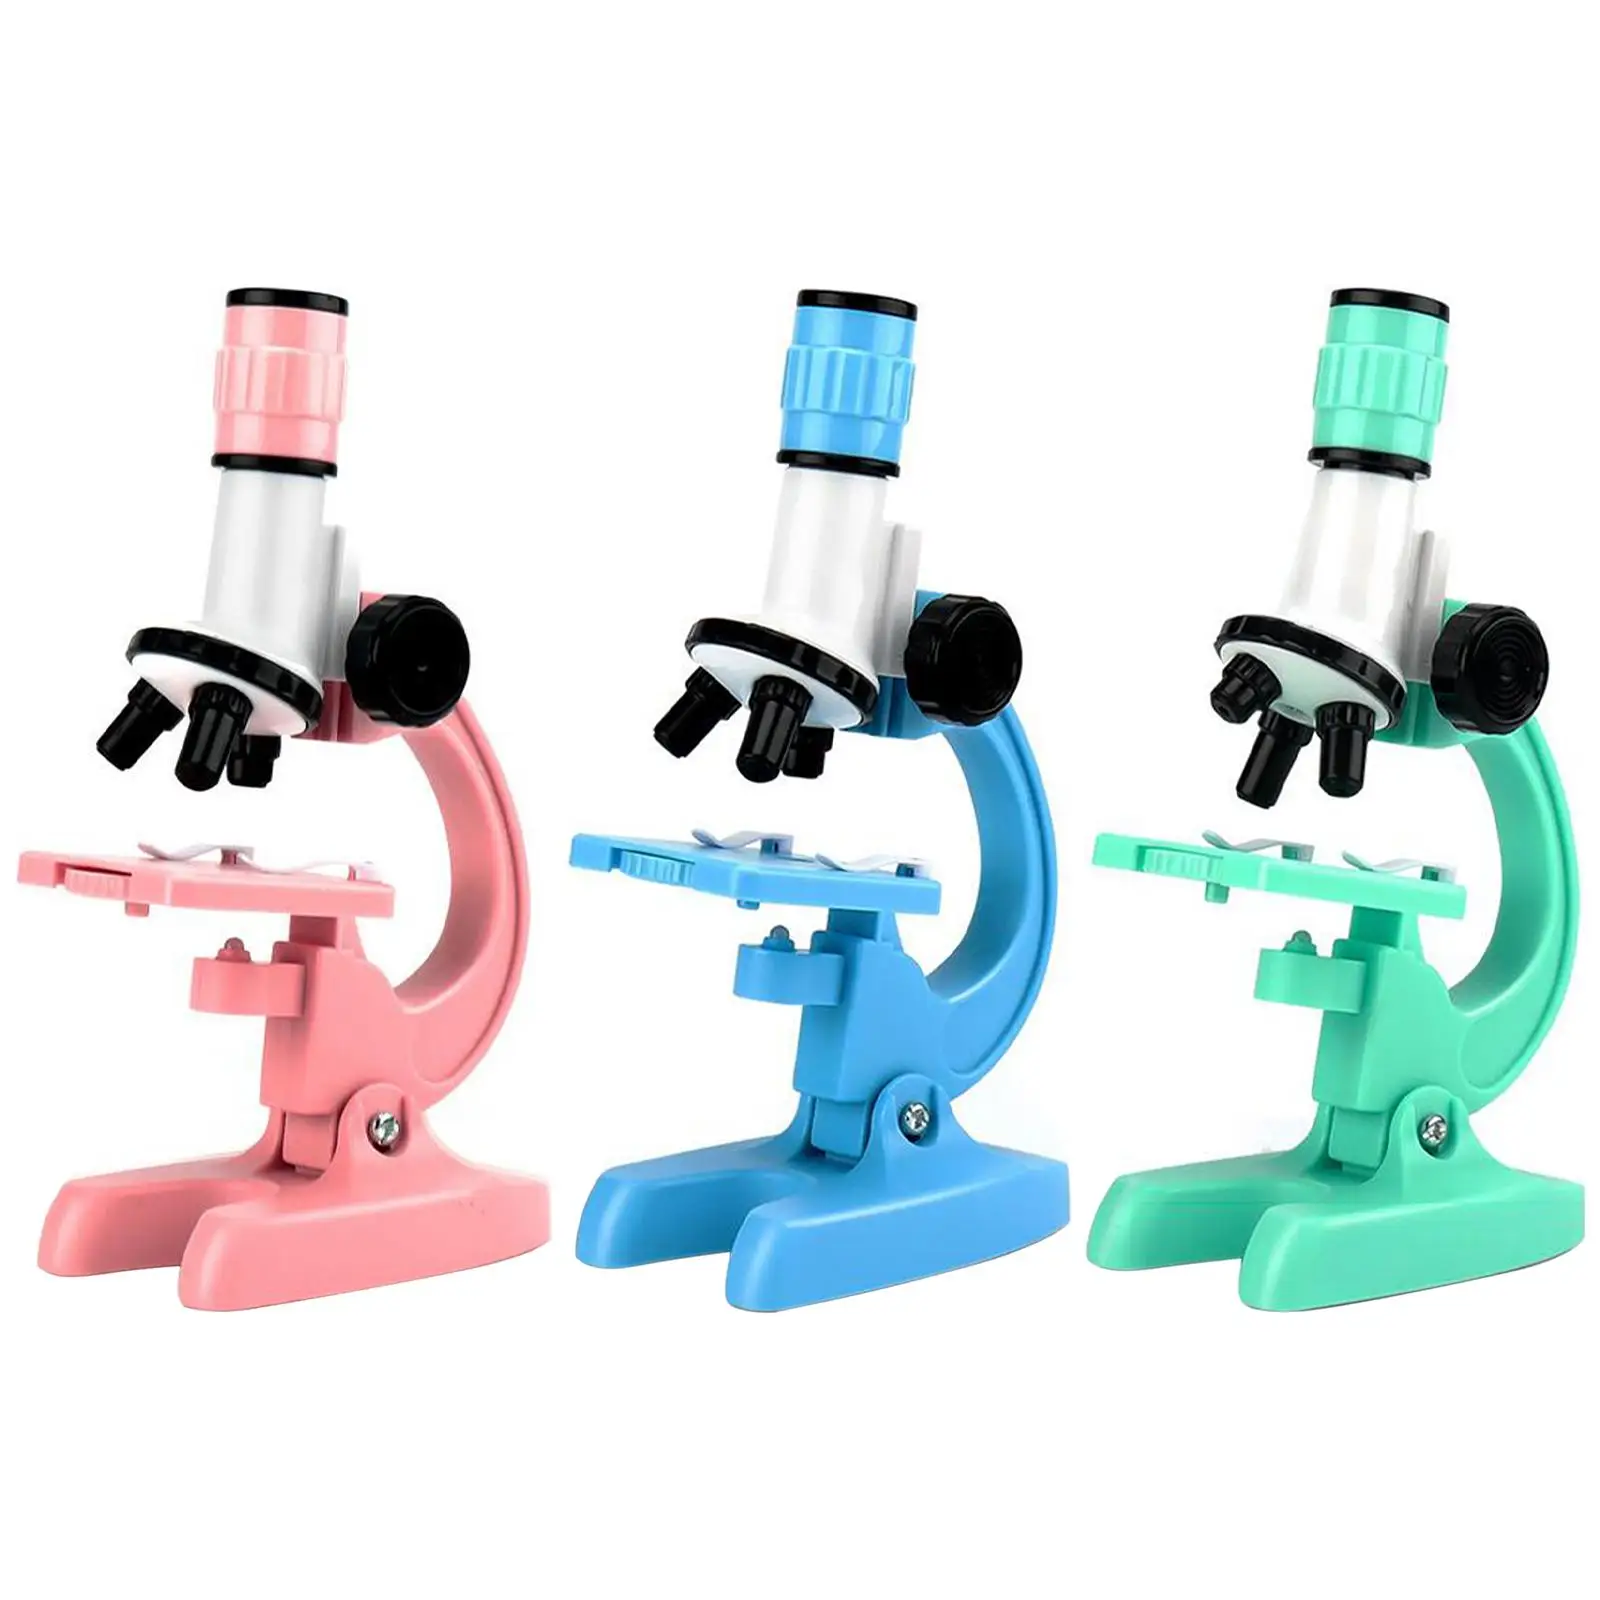 

Kids Beginner Microscope Kit 100x-1200x Scientific Exploration Angle Adjustable Teaching Aids Biological Gifts Kids Science Toys